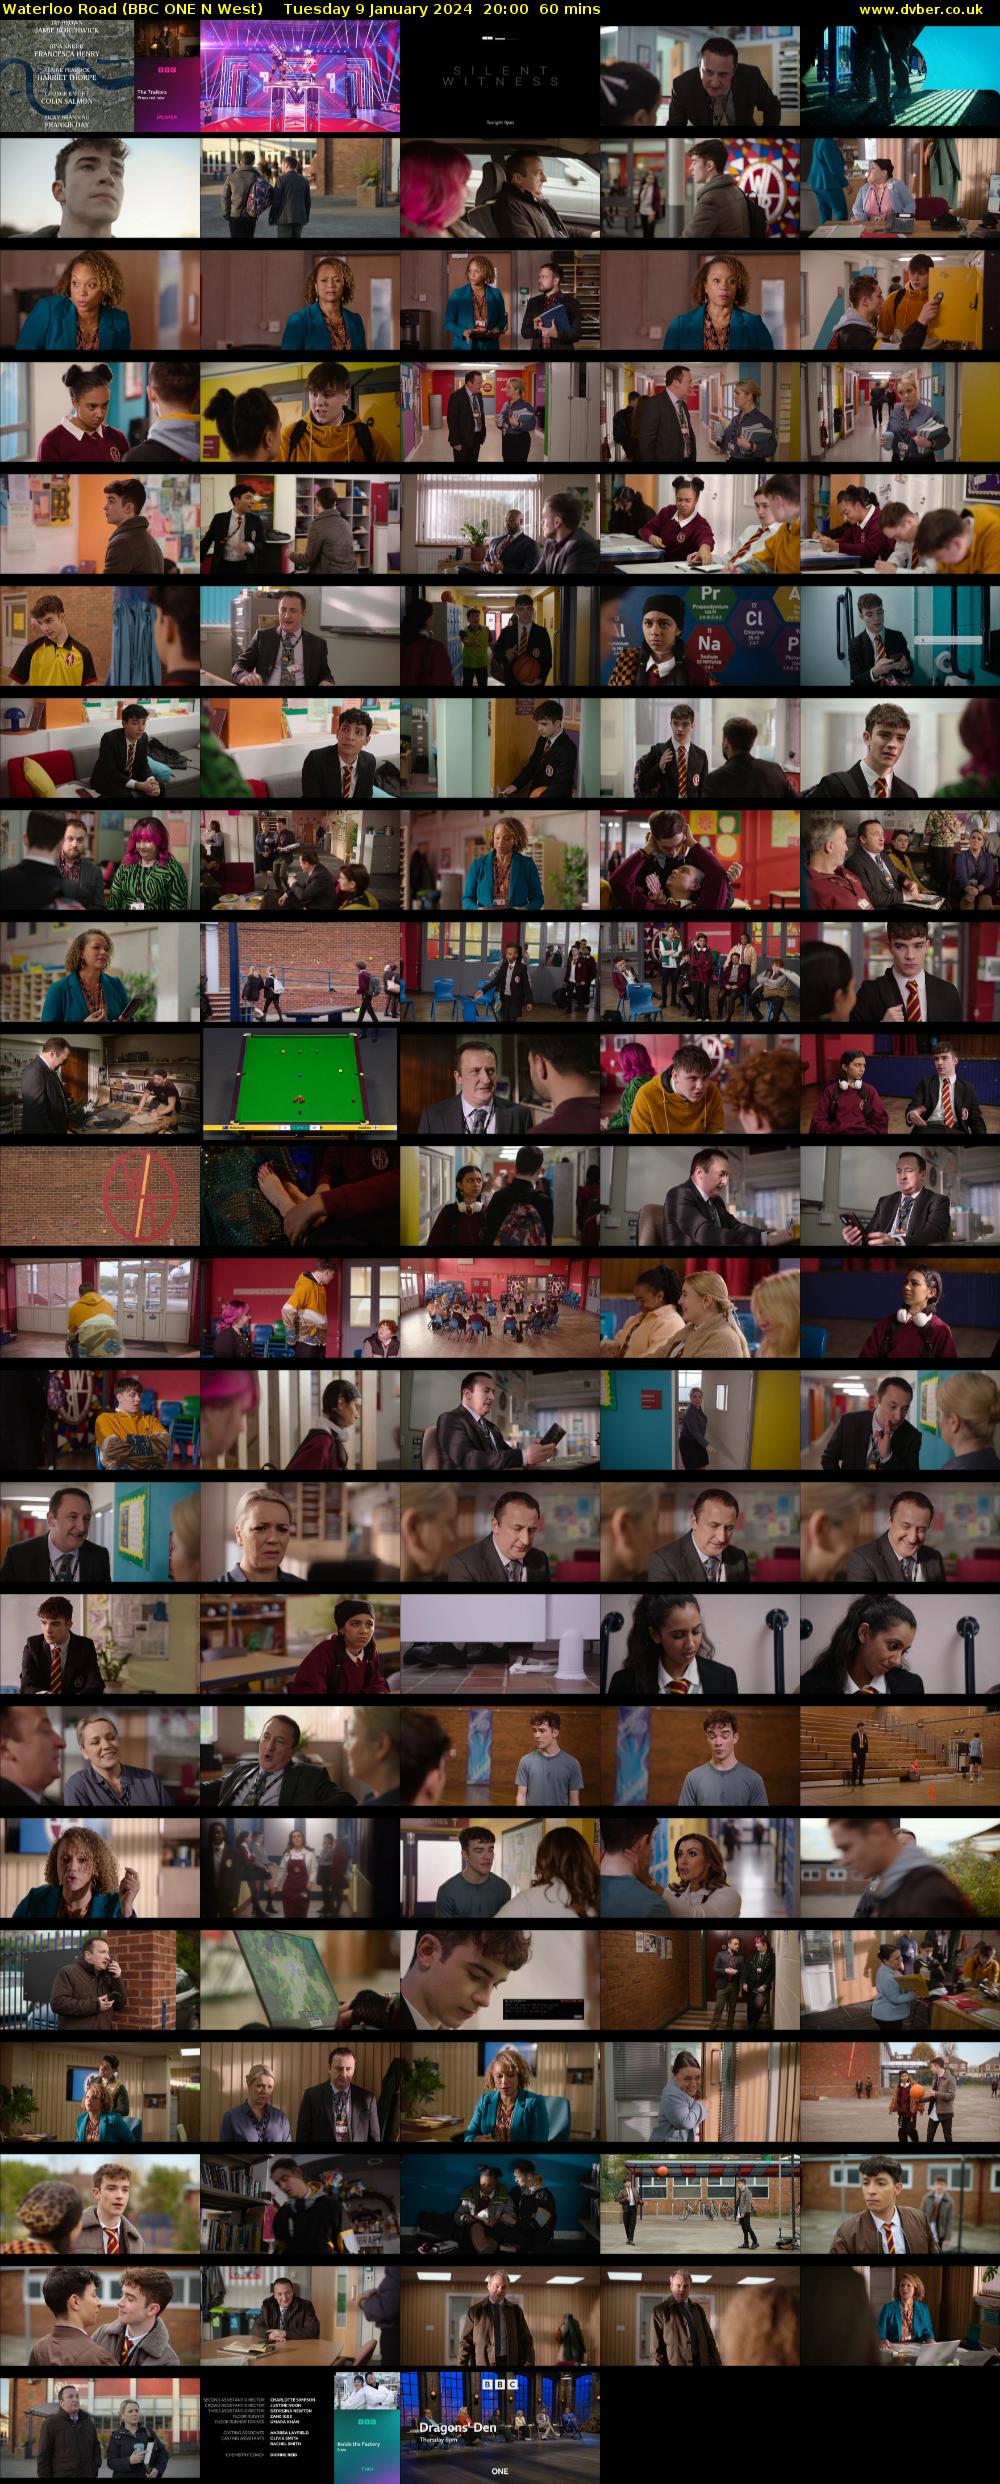 Waterloo Road (BBC ONE N West) Tuesday 9 January 2024 20:00 - 21:00